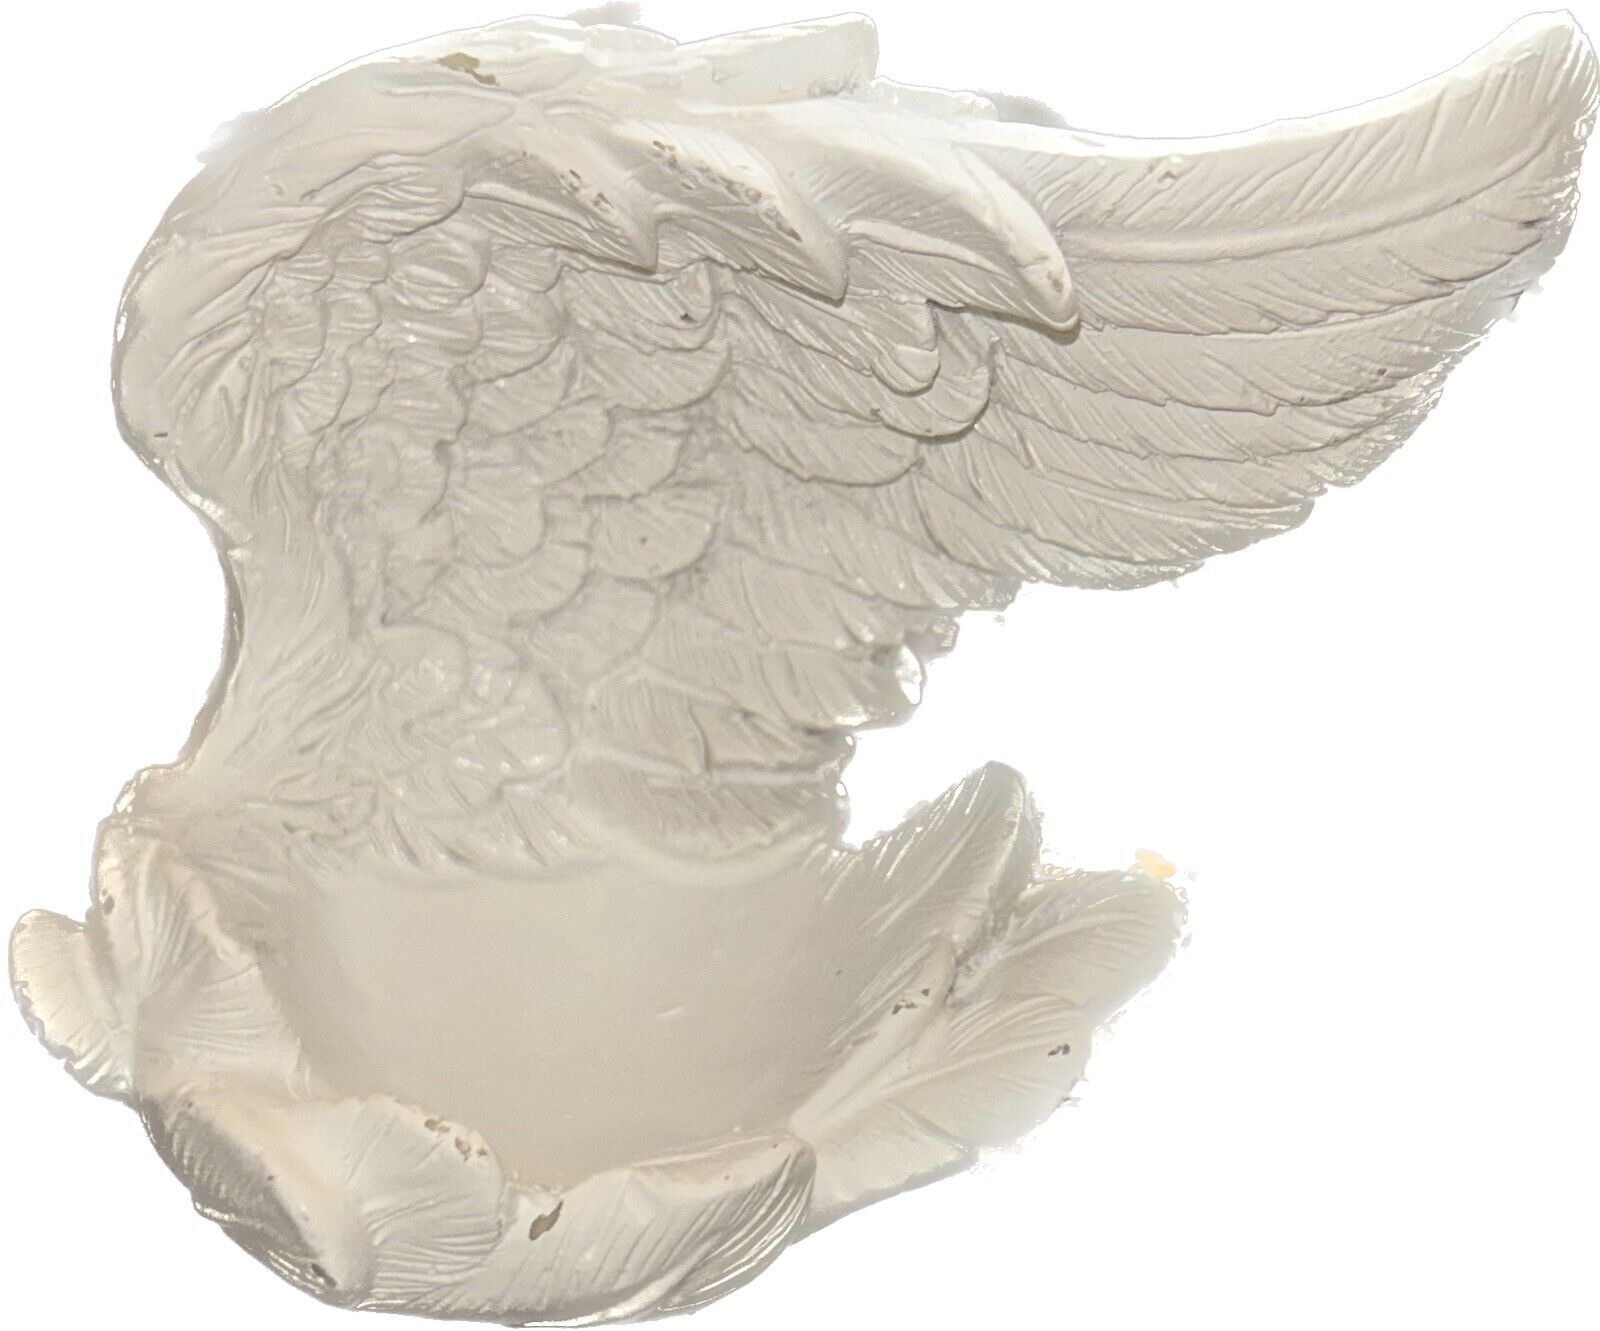 Base Crafts Ornament Home Decoration White Angel Wing Feather Resin 3 x 2 in